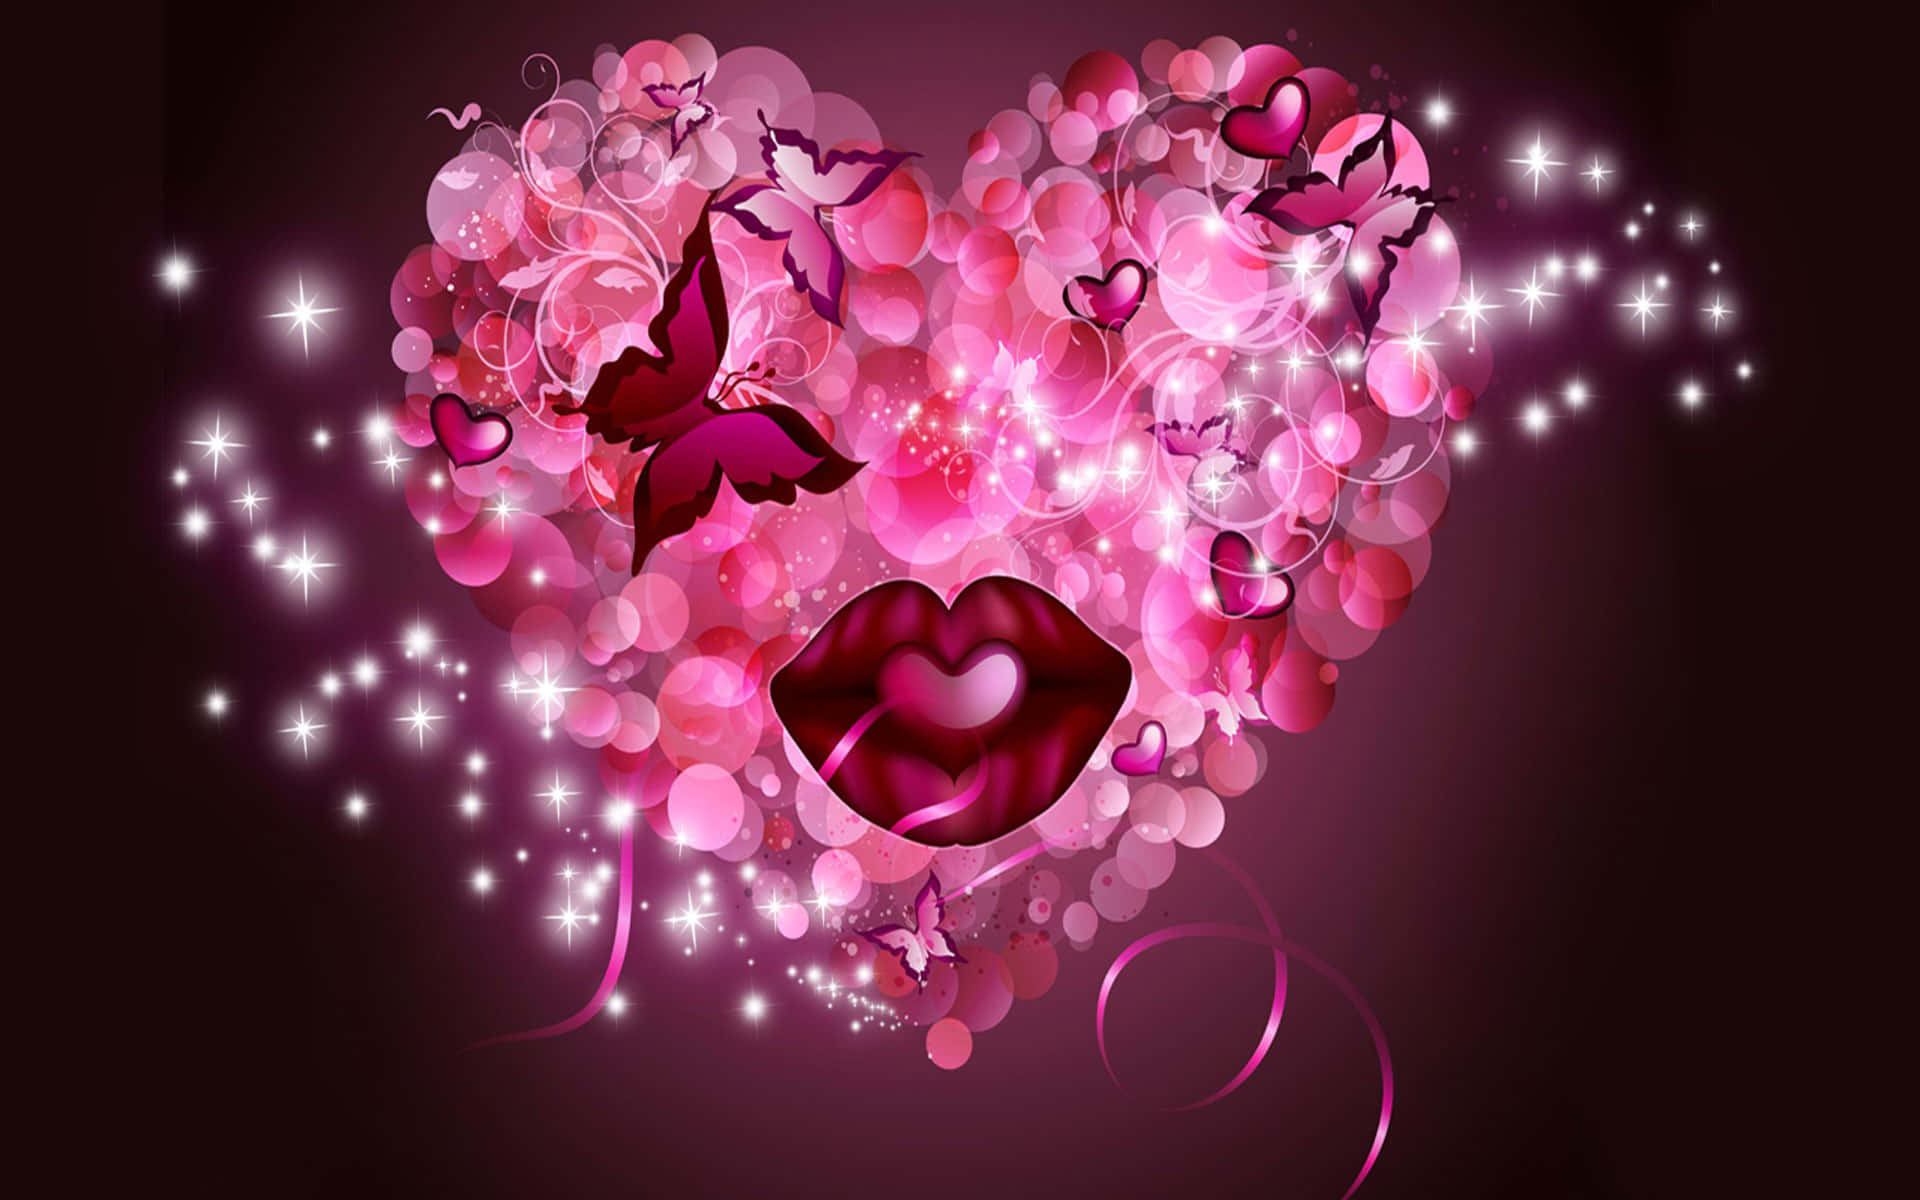 Download A Tender Moment of Pink Love Wallpaper